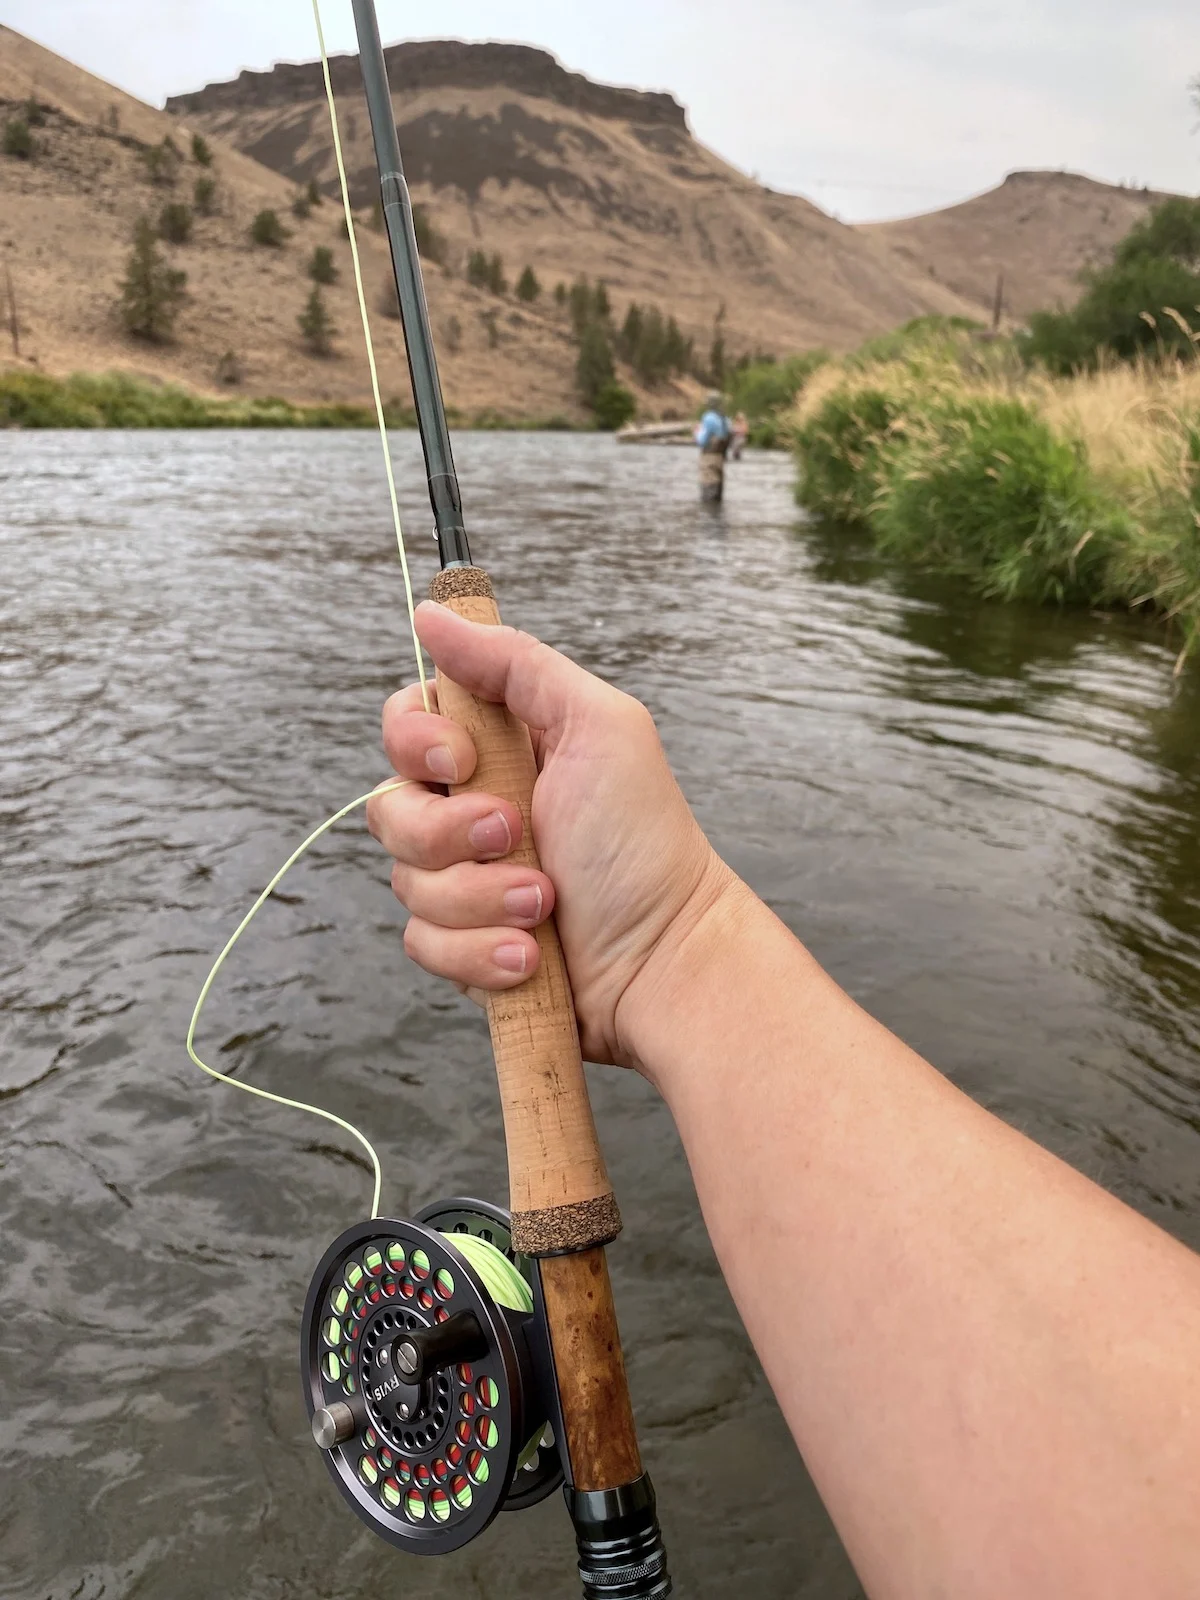 Hand holding a fishing rod and reel out over a river